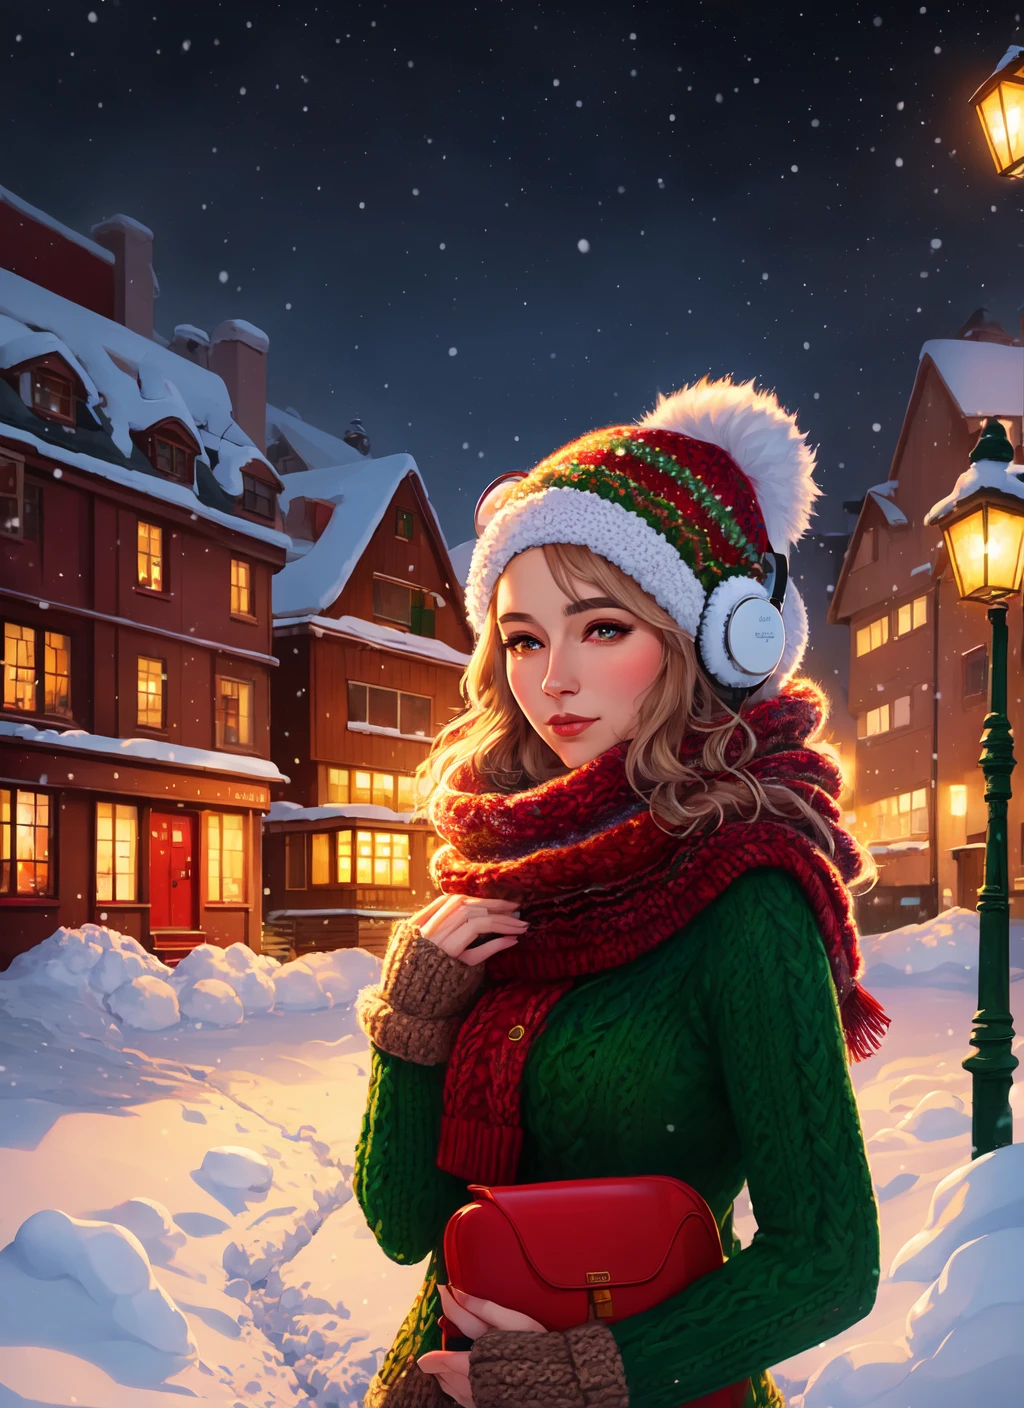 Female person, knitted sweater, fluffy earmuffs, winter boots, woolen mittens, red and green colors, acrylic paints, Jessica Durrant, Sandra Eterovic, HD, warm and cozy, intricate details, high contrast, beautiful lighting, snow-covered rooftops, serene atmosphere.